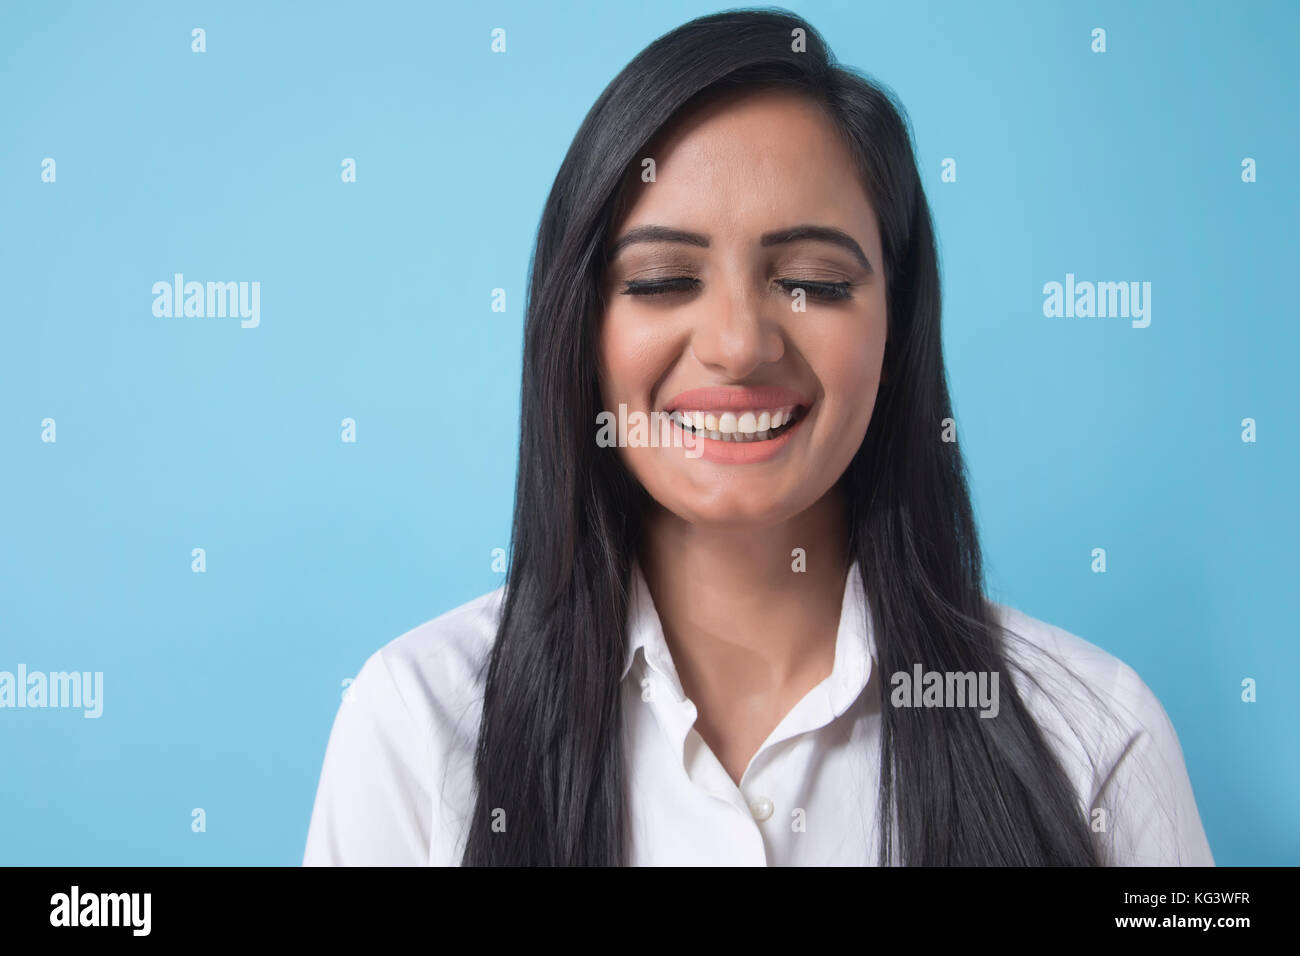 Portrait of smiling young businesswoman over blue background Stock Photo